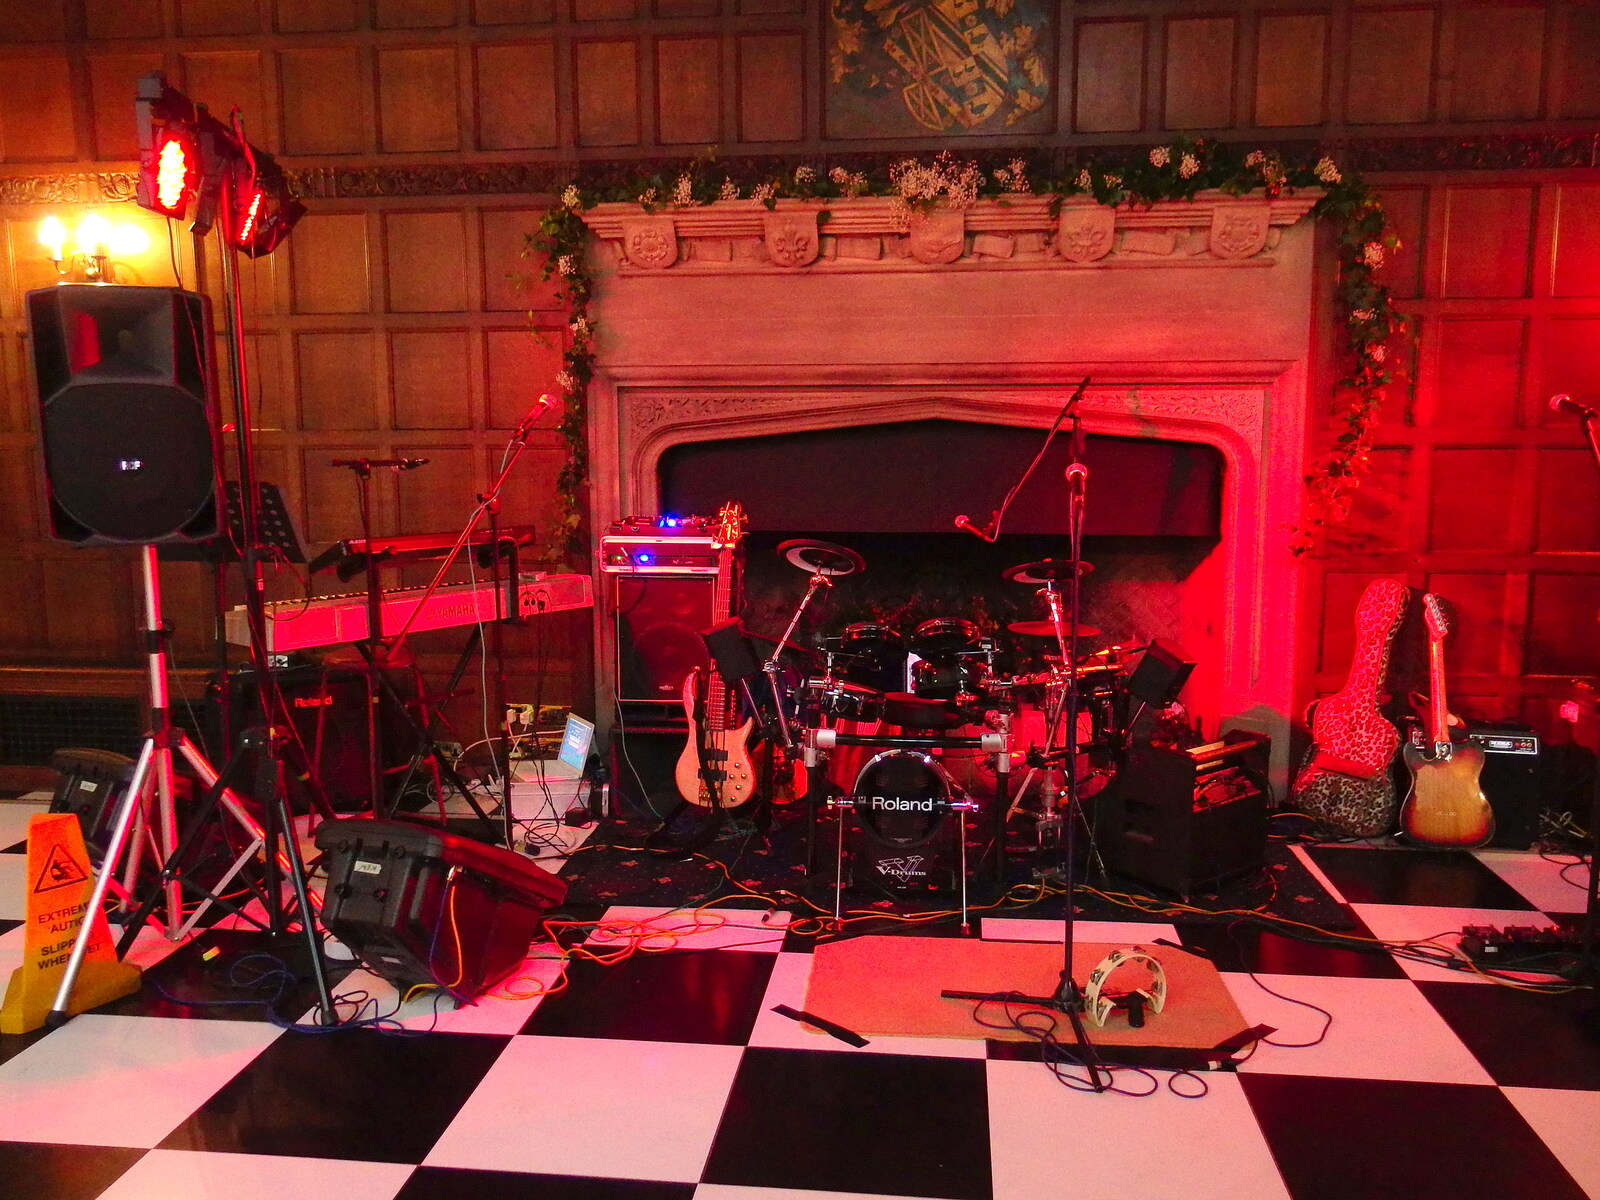 The stage is set from The BBs at Hengrave Hall, Hengrave, Suffolk - 18th August 2013